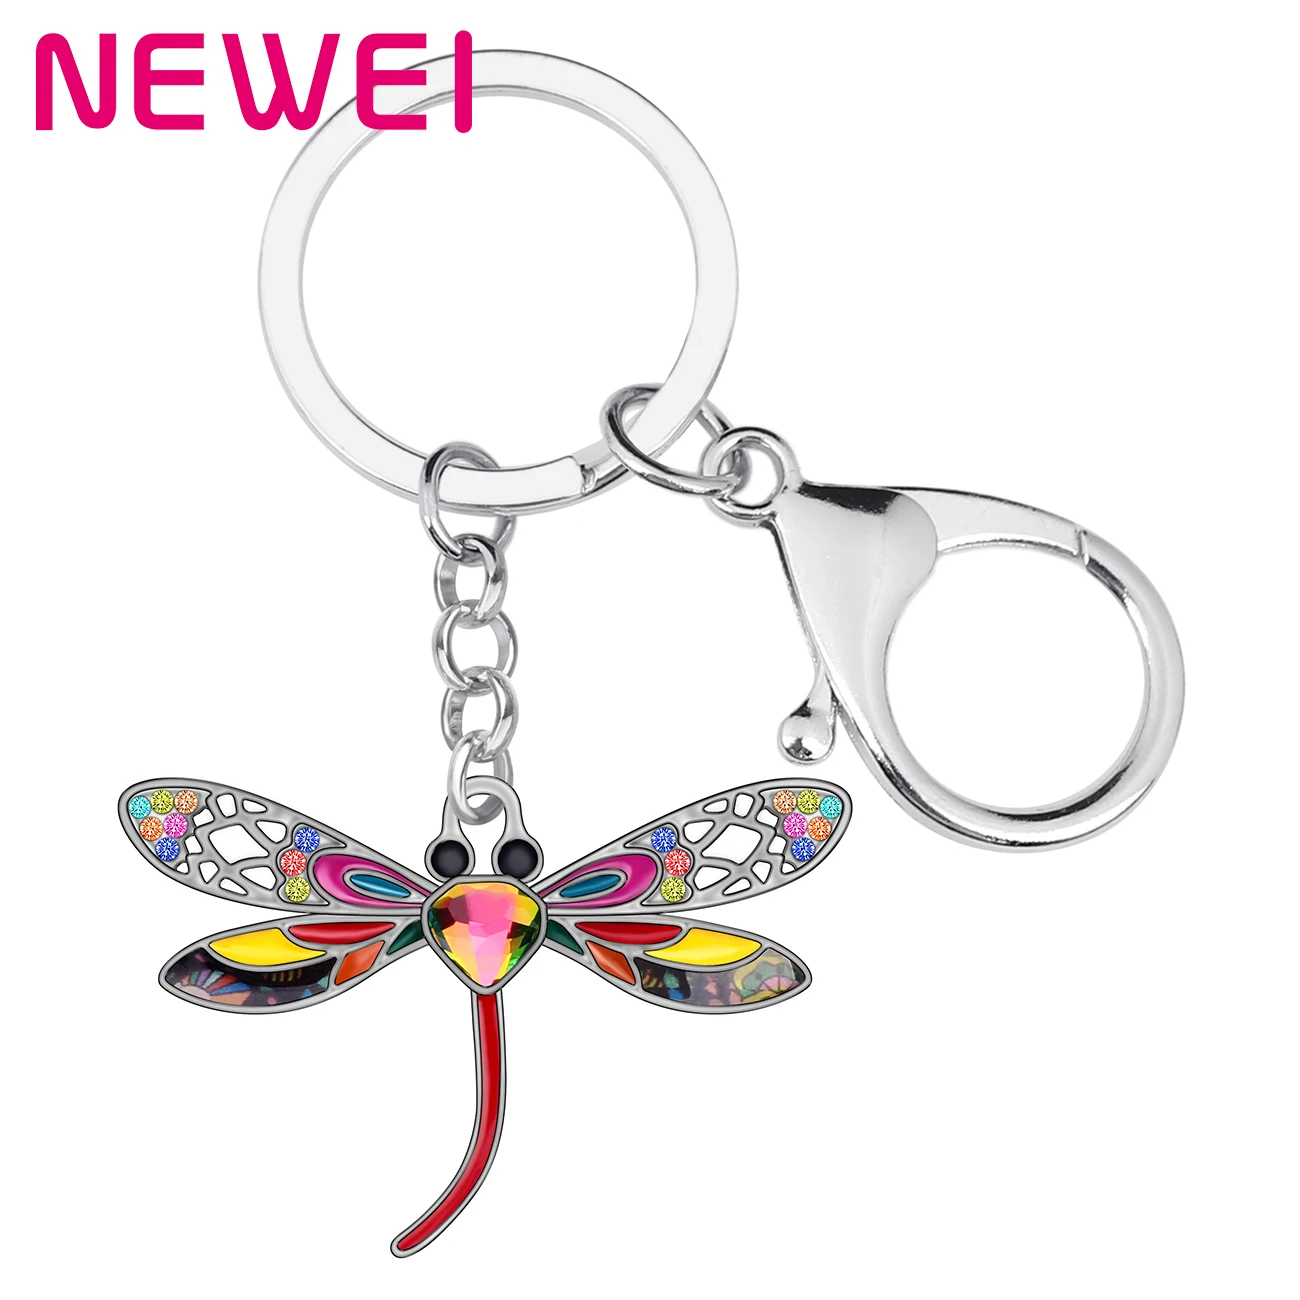 

Enamel Alloy Rhinestone Cute Dragonfly Keychains Insects Keyrings Jewelry Wallet Car Charms For Women Girls Teens Kids Gifts, Multicolor blue black purple pink green